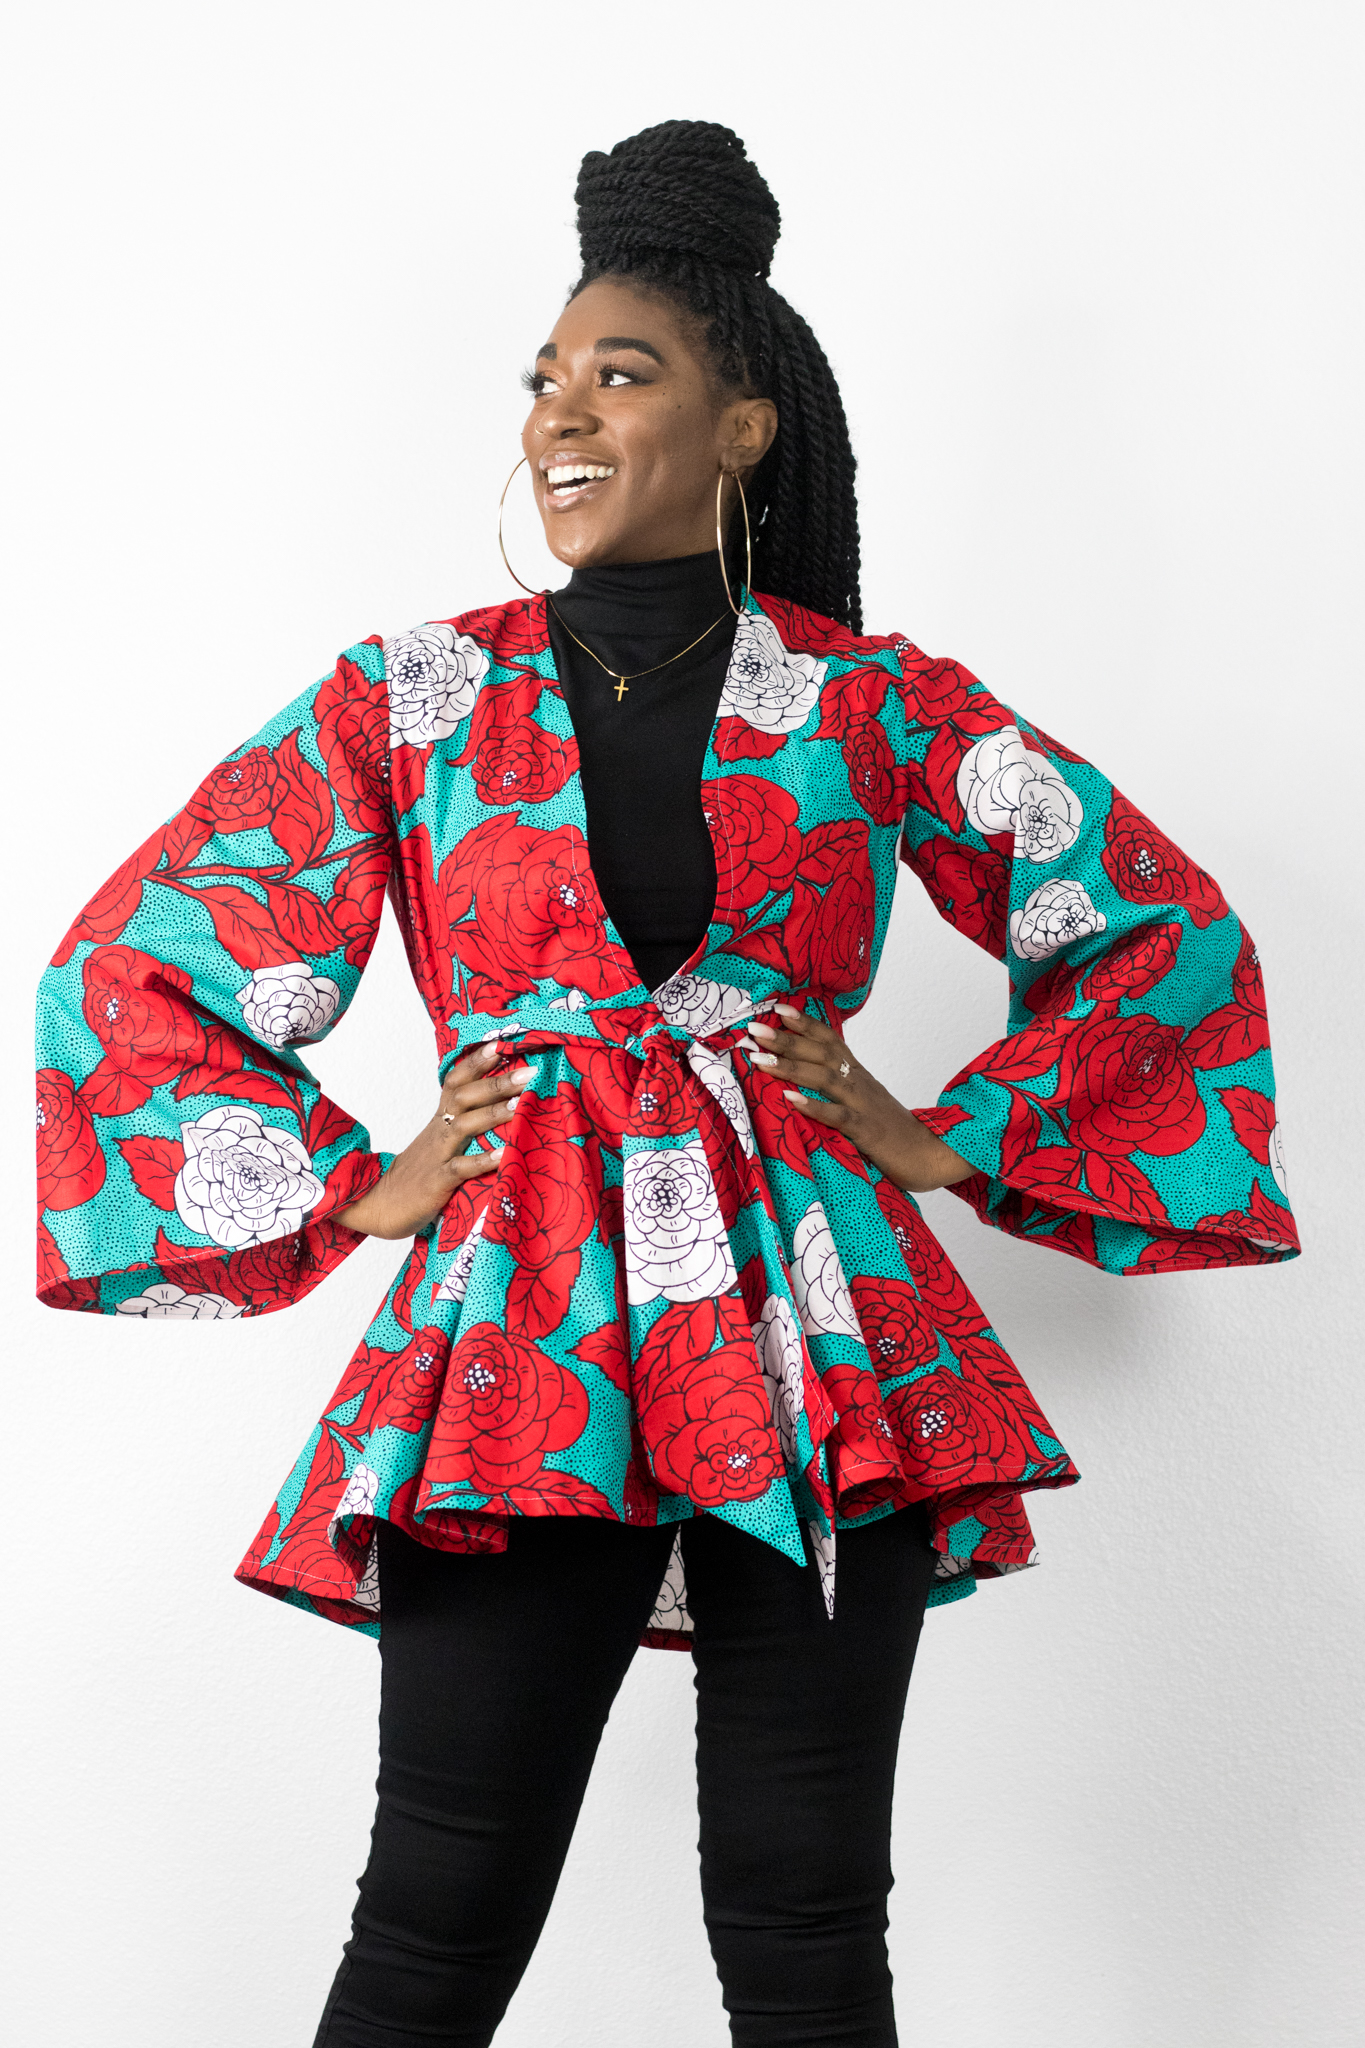 https://montoyamayo.com/wp-content/uploads/2020/01/DIY-Sewing-Wrap-Top-With-Bell-Sleeve-Ankara-African-Wax-print-floral-print-red-white-blue-11.jpg